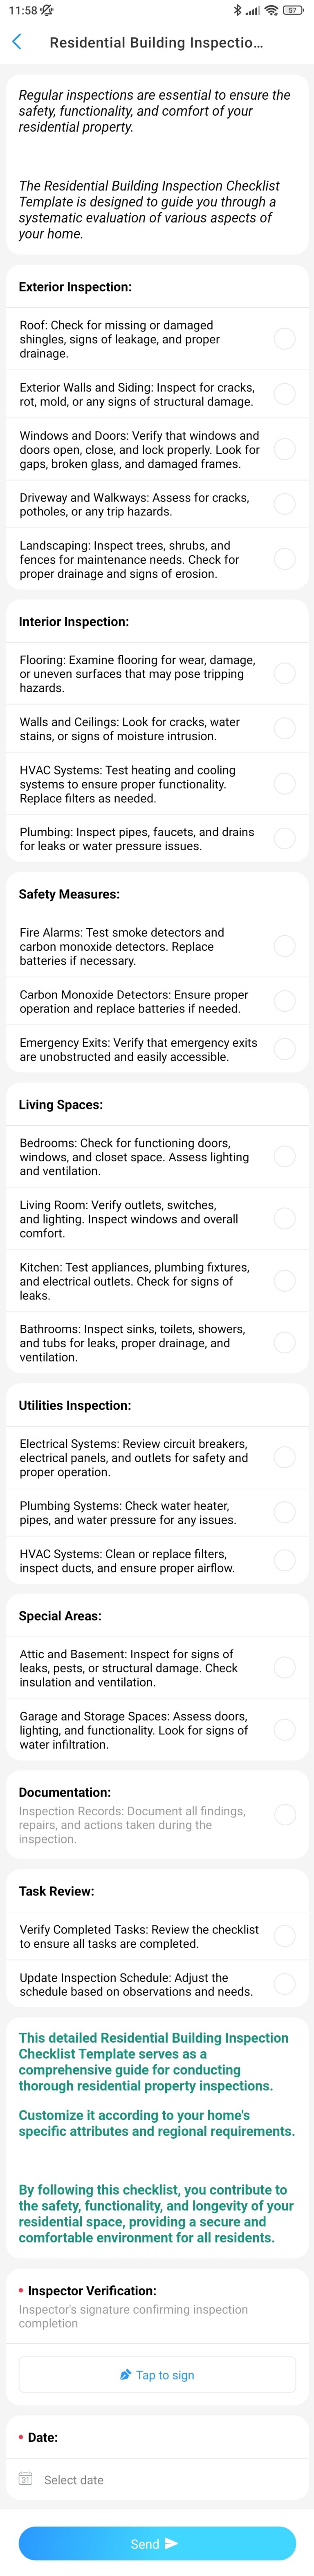 Residential Building Inspection Checklist Template